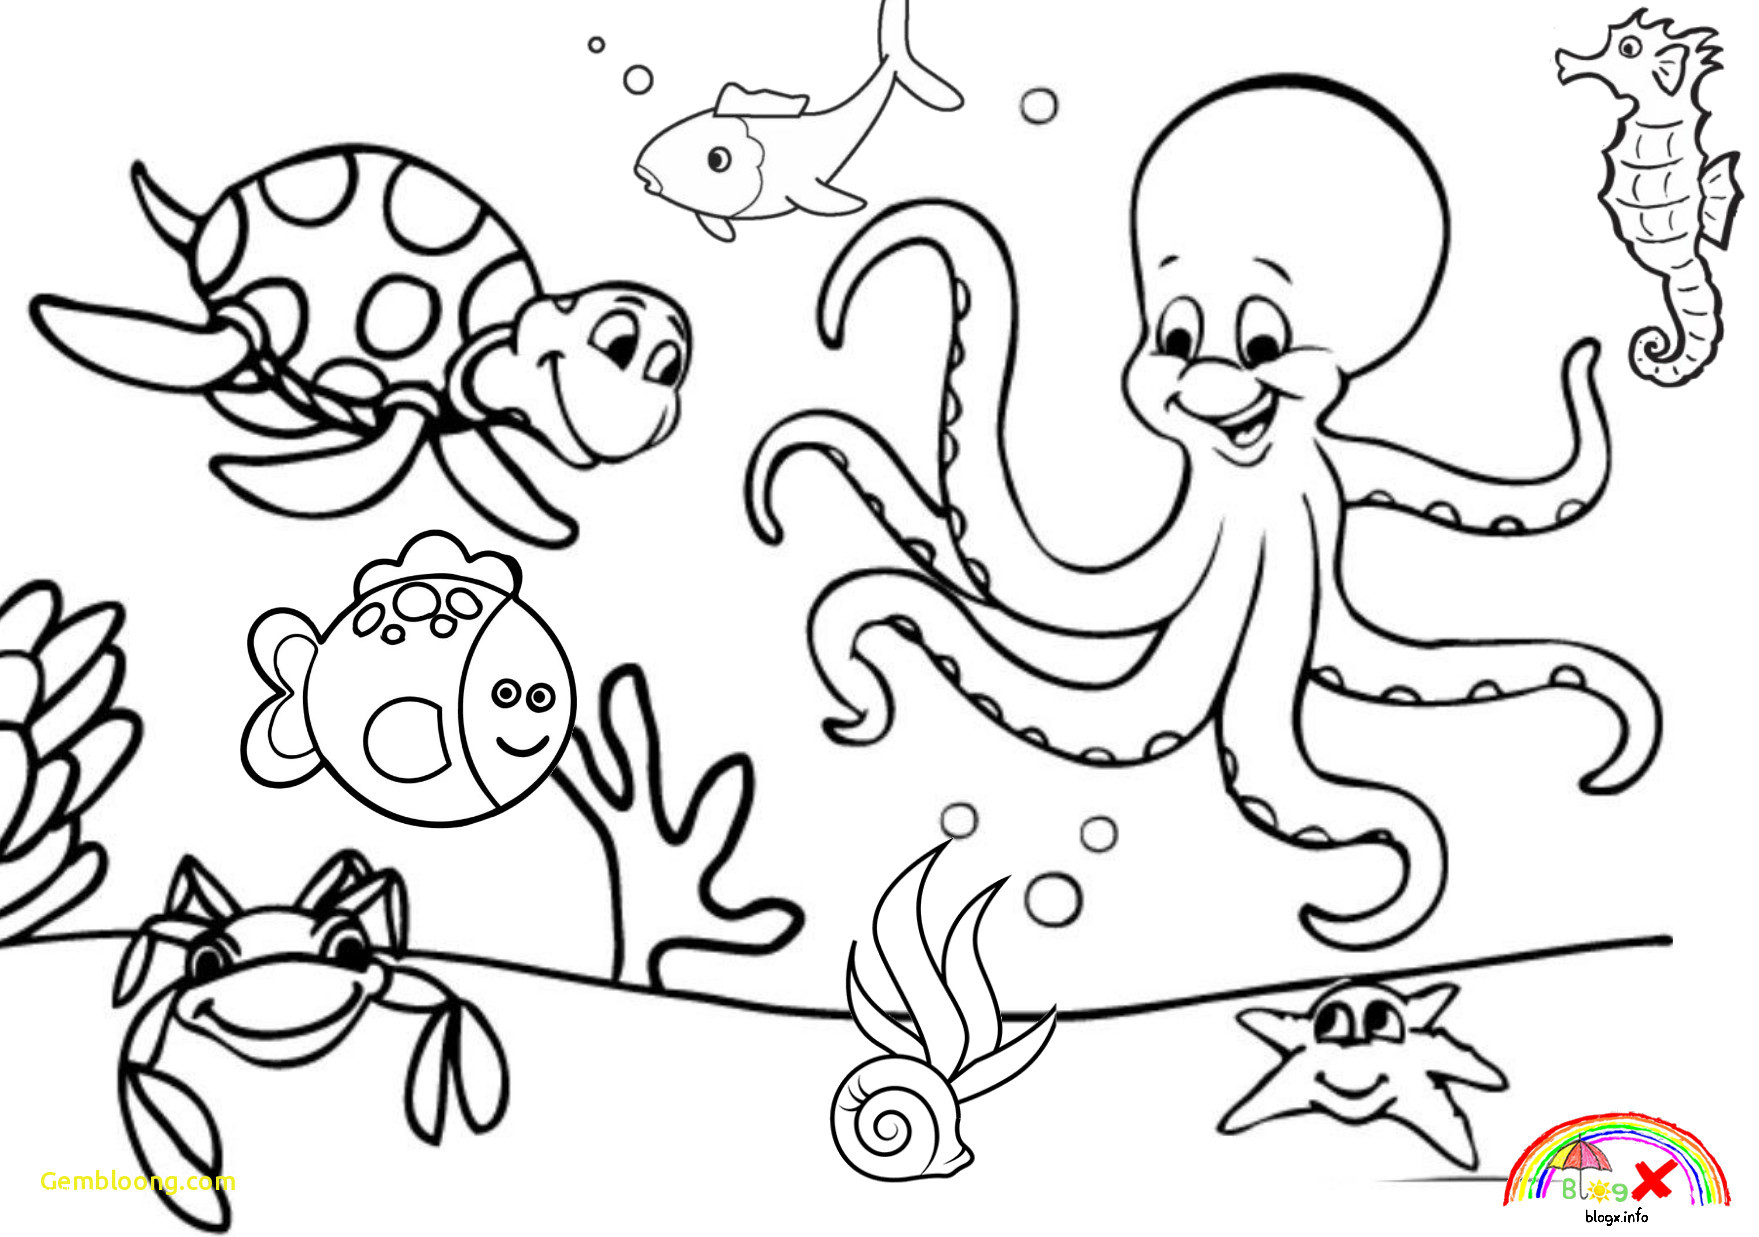 Coloring Pages Worksheets Sea Animals Ocean Pagesheet